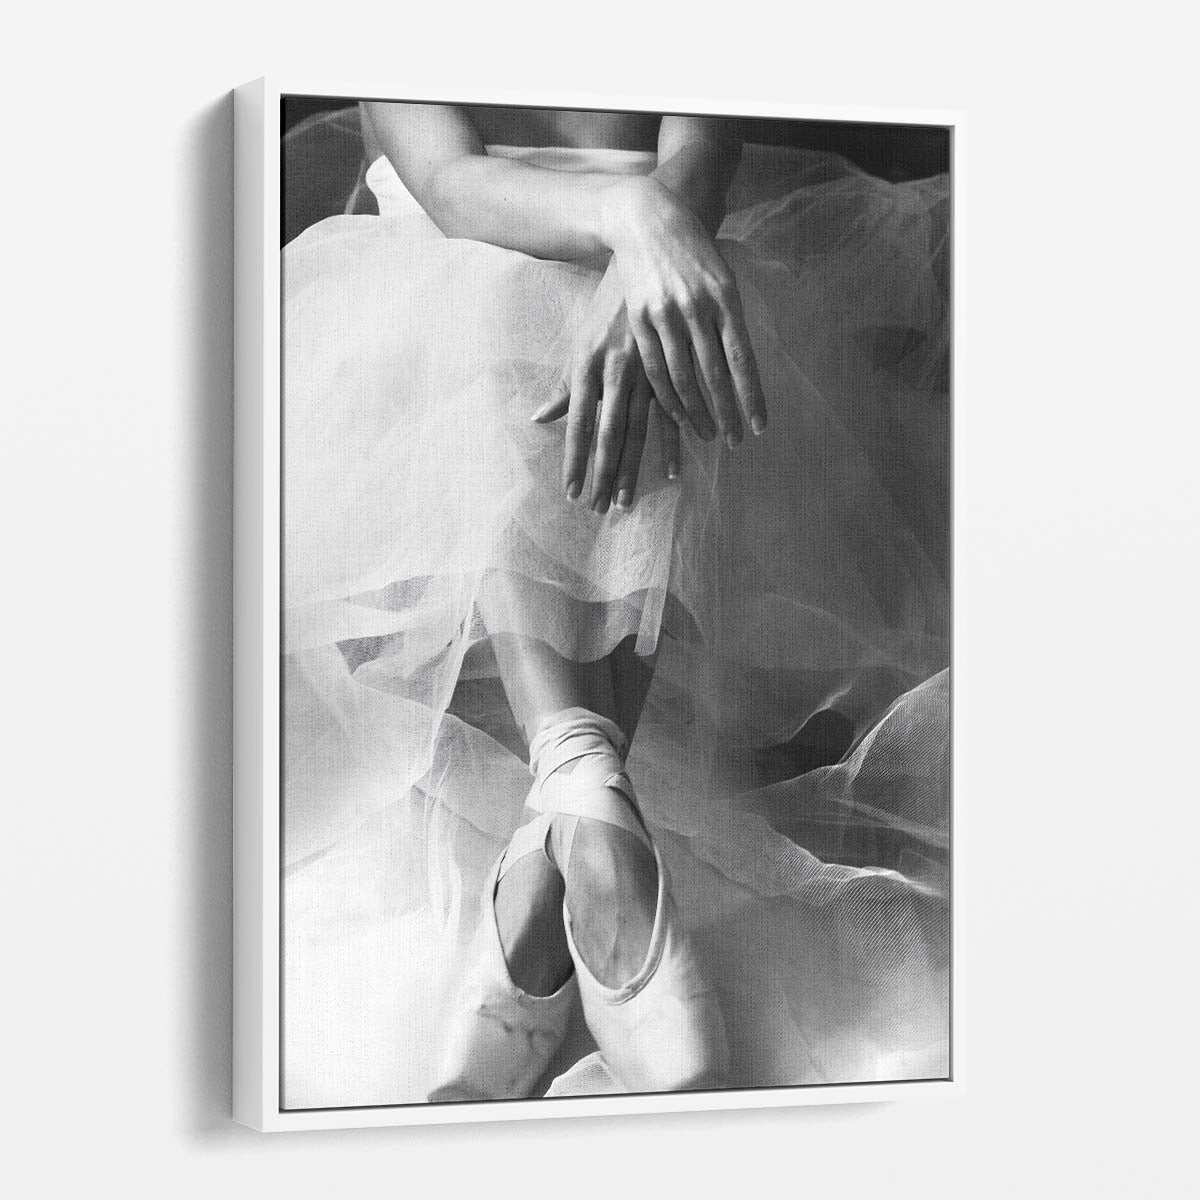 Elegant Resting Ballerina Portrait in Monochrome Photography Art by Luxuriance Designs, made in USA